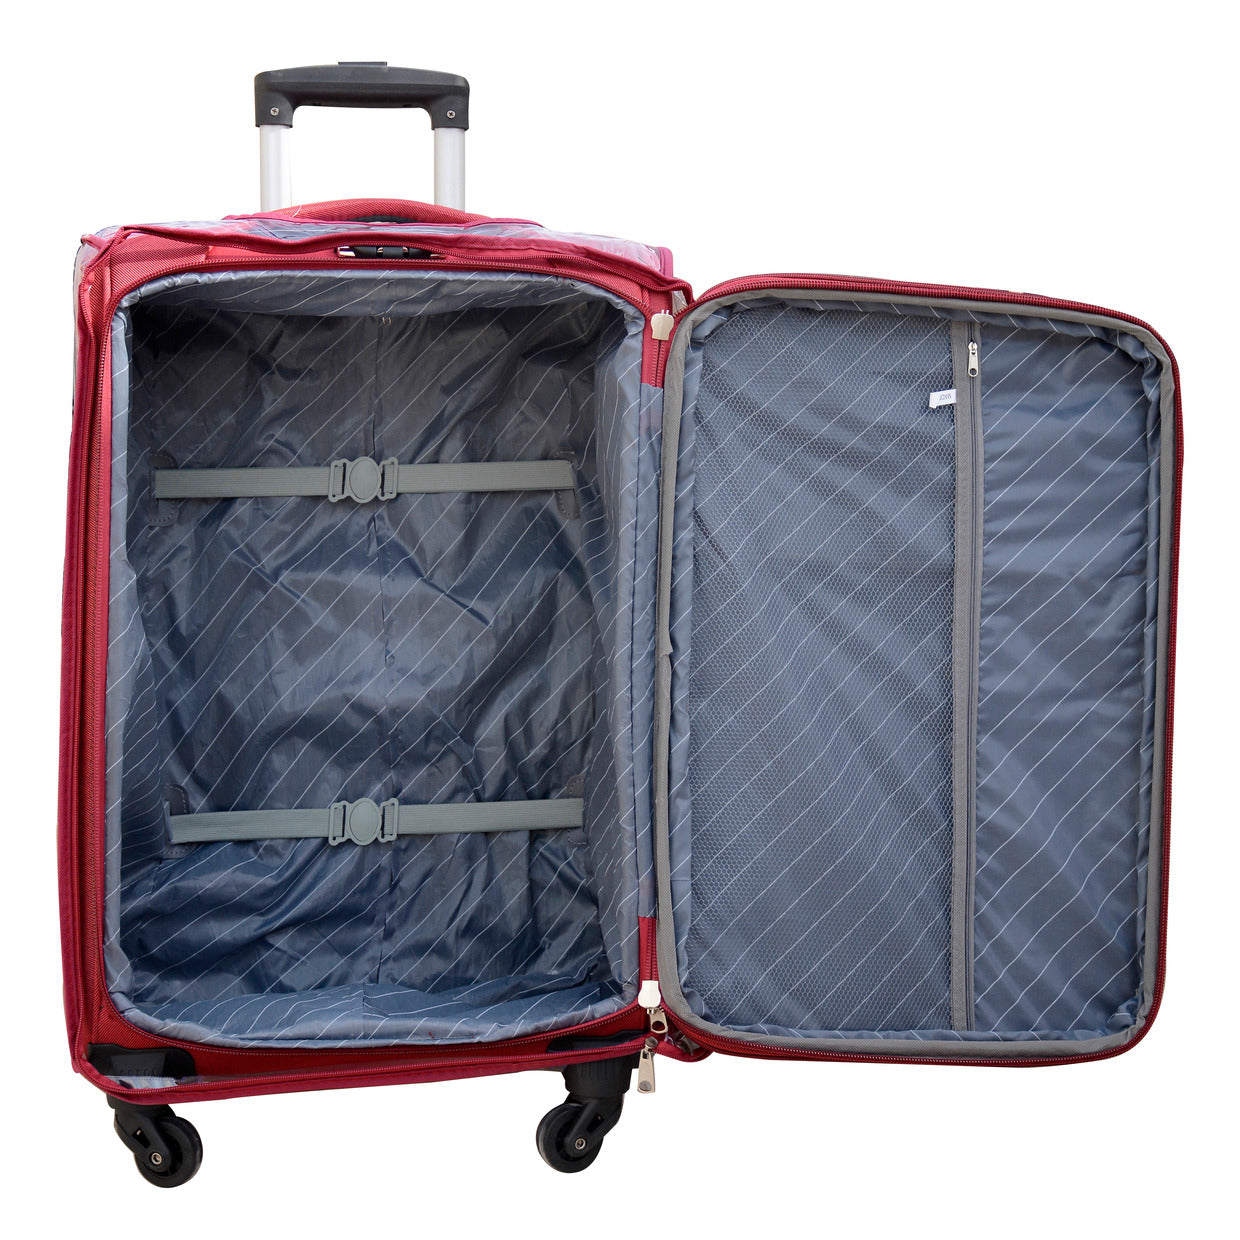 Red Color Premium Luggage With Full Set Cover | Premium Red Luggage With Cover C1 - PMLGSM4WBL